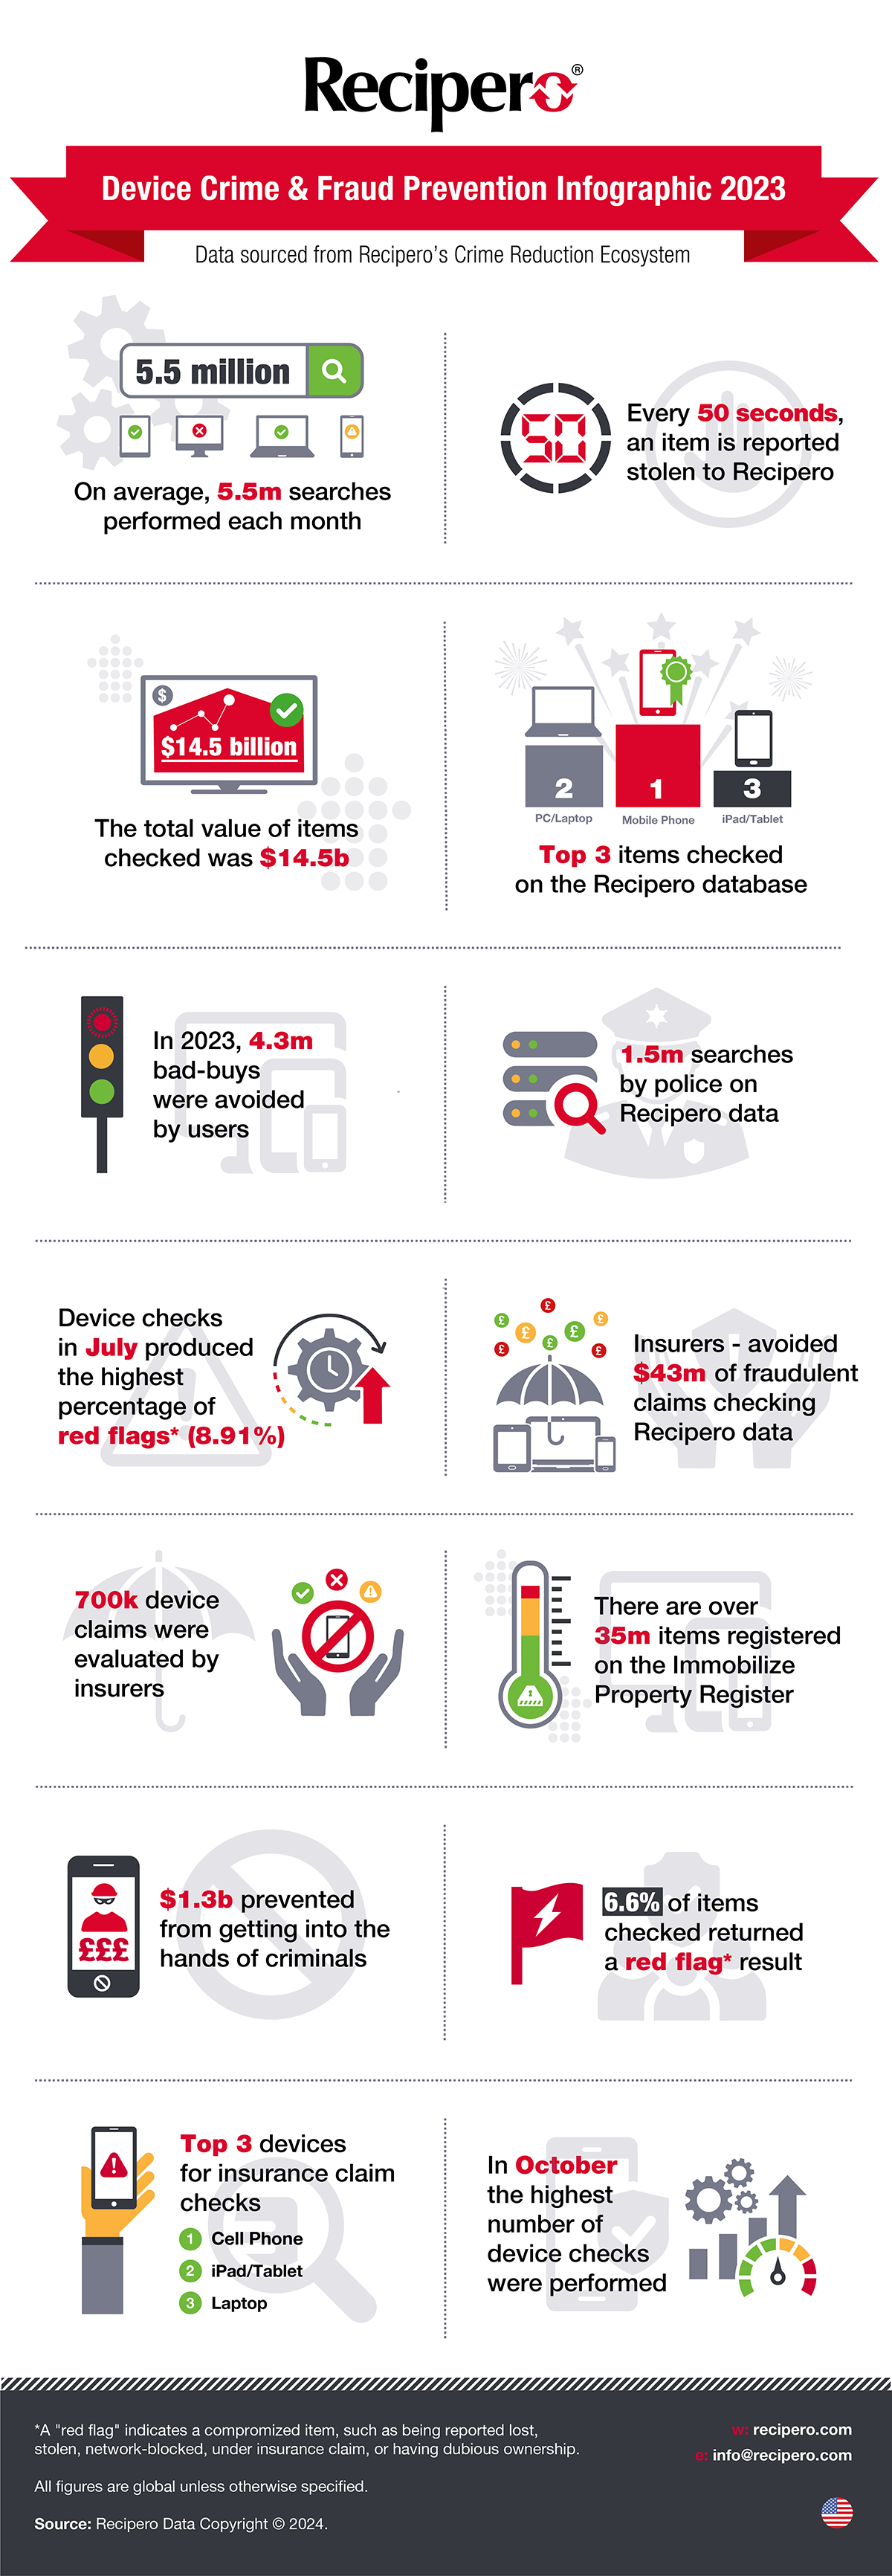 Device Crime & Fraud Prevention Infographic 2023